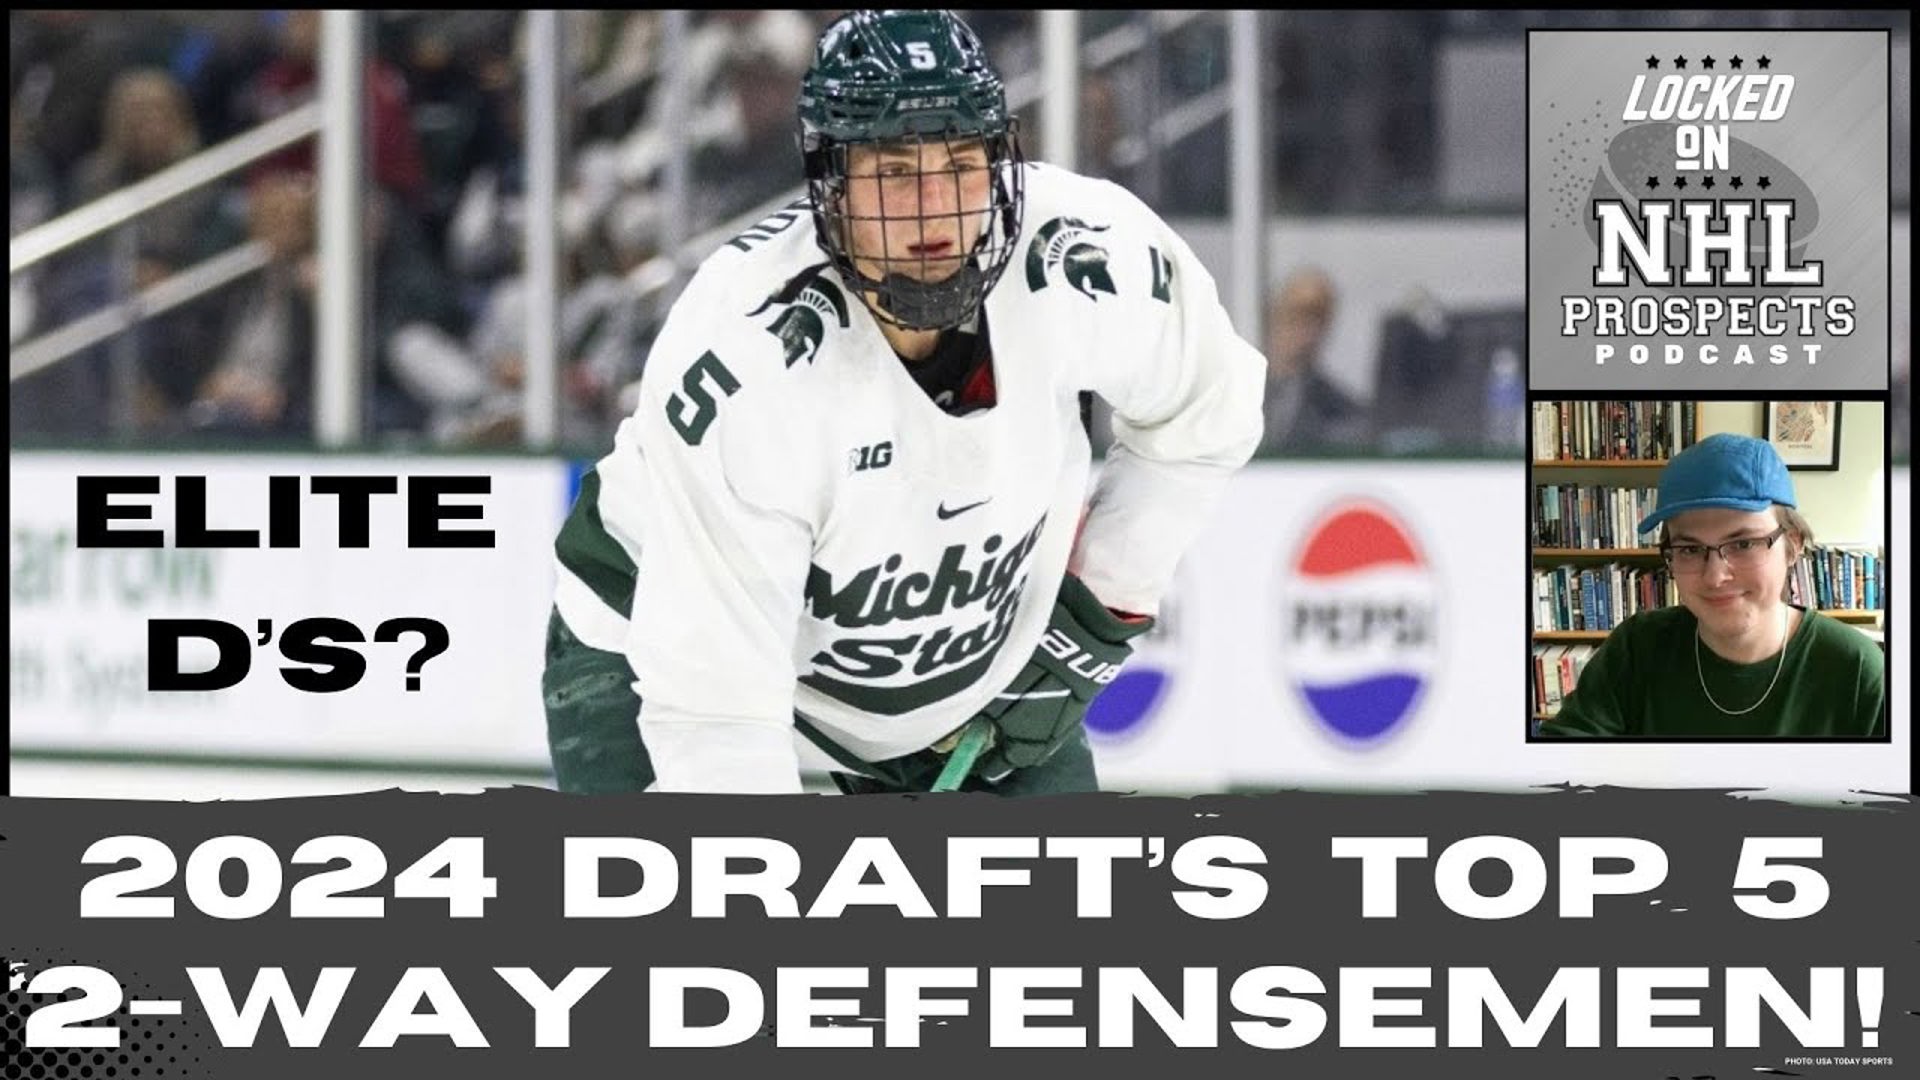 In this episode, Sebastian breaks down the Top 5 two-way defensemen eligible for the 2024 NHL Draft!